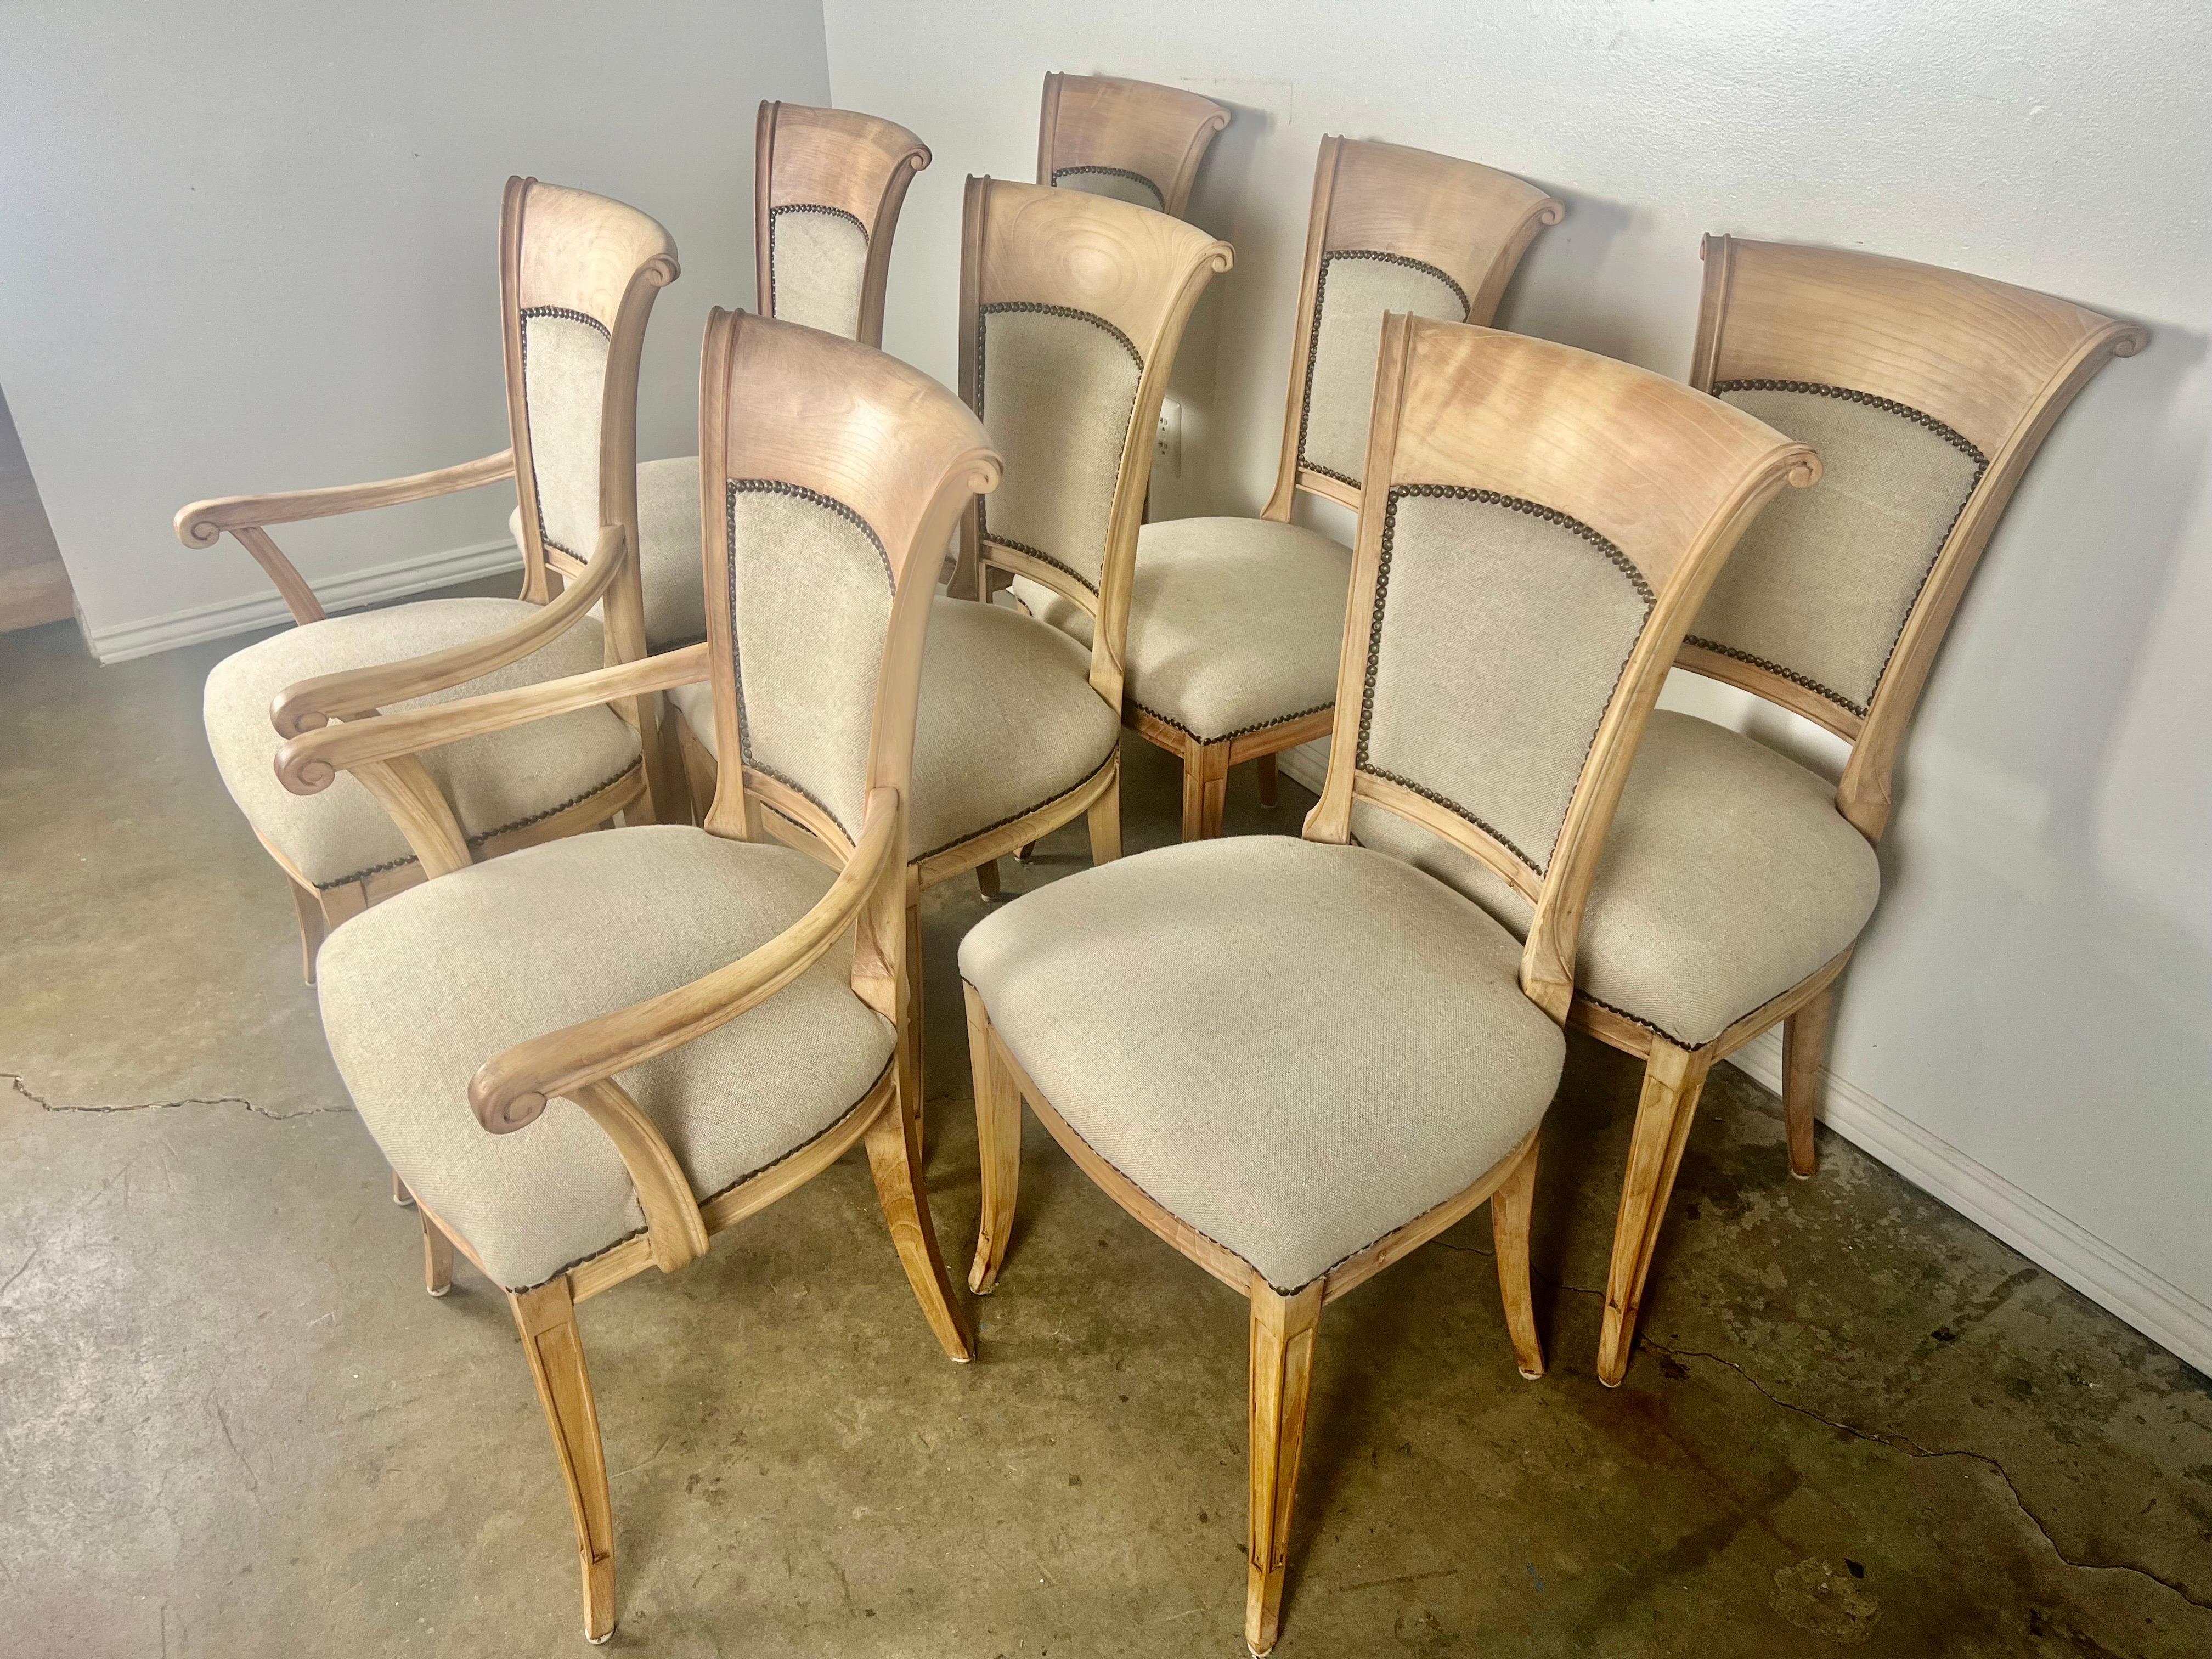 Wood Set of Eight Swedish Dining Room Chairs w/ Belgium Linen Upholstery